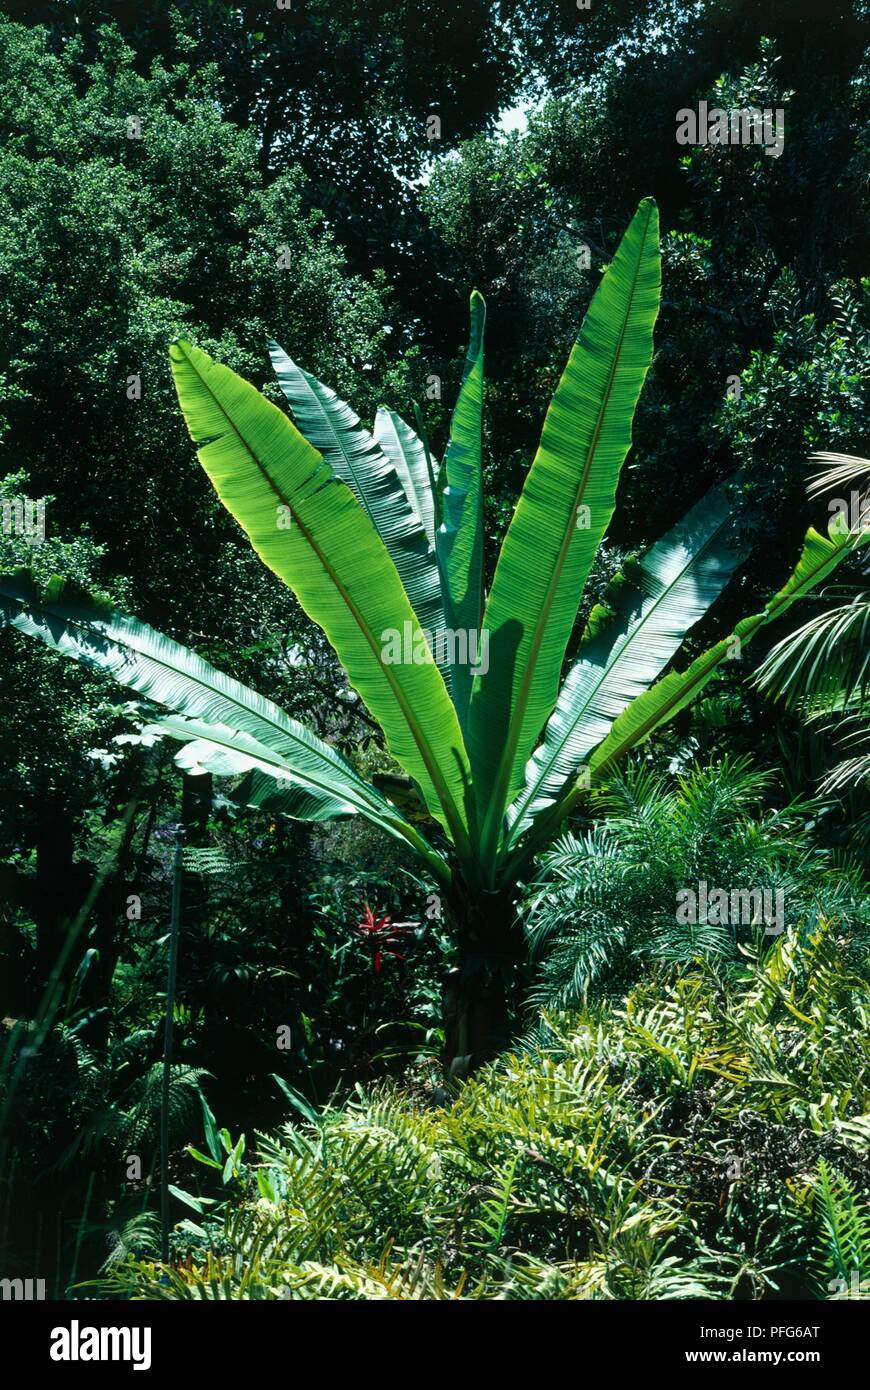 Ensete ventricosum (Abyssinian Banana, Ethiopian Banana) with large, upright green leaves Stock Photo